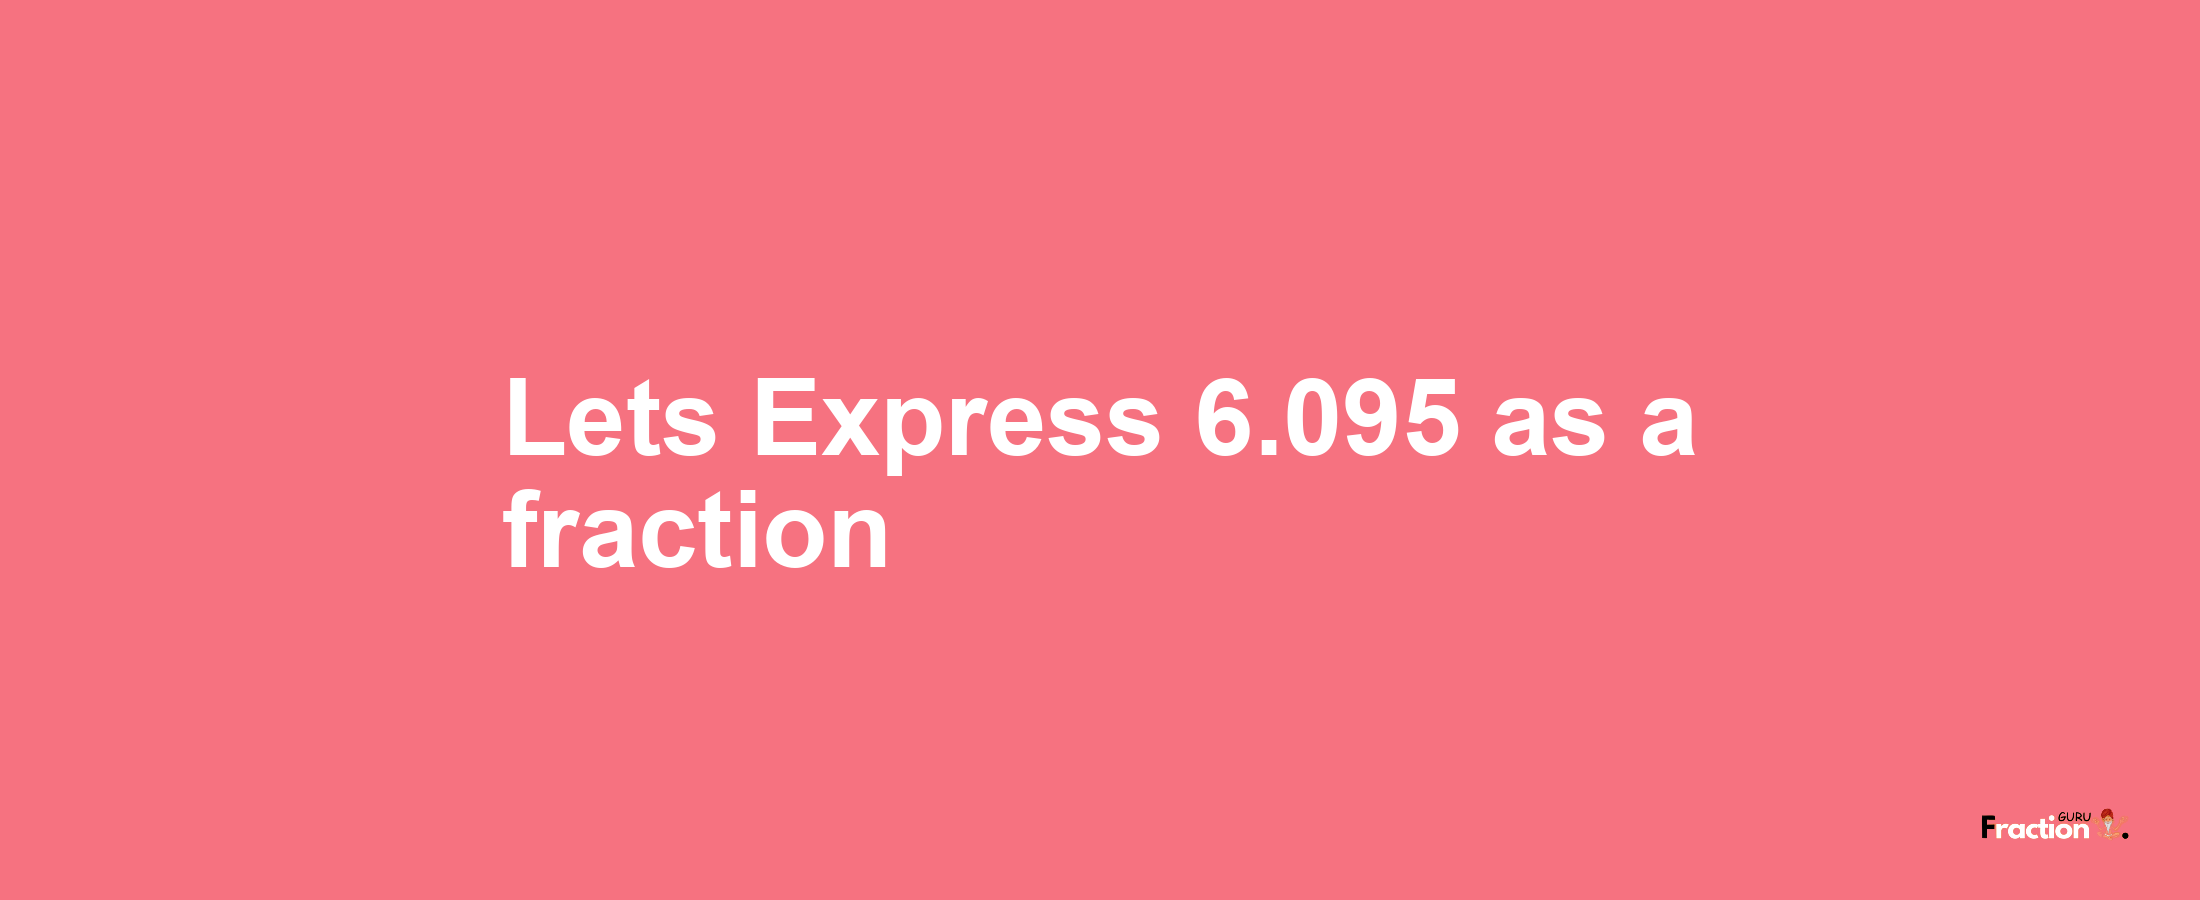 Lets Express 6.095 as afraction